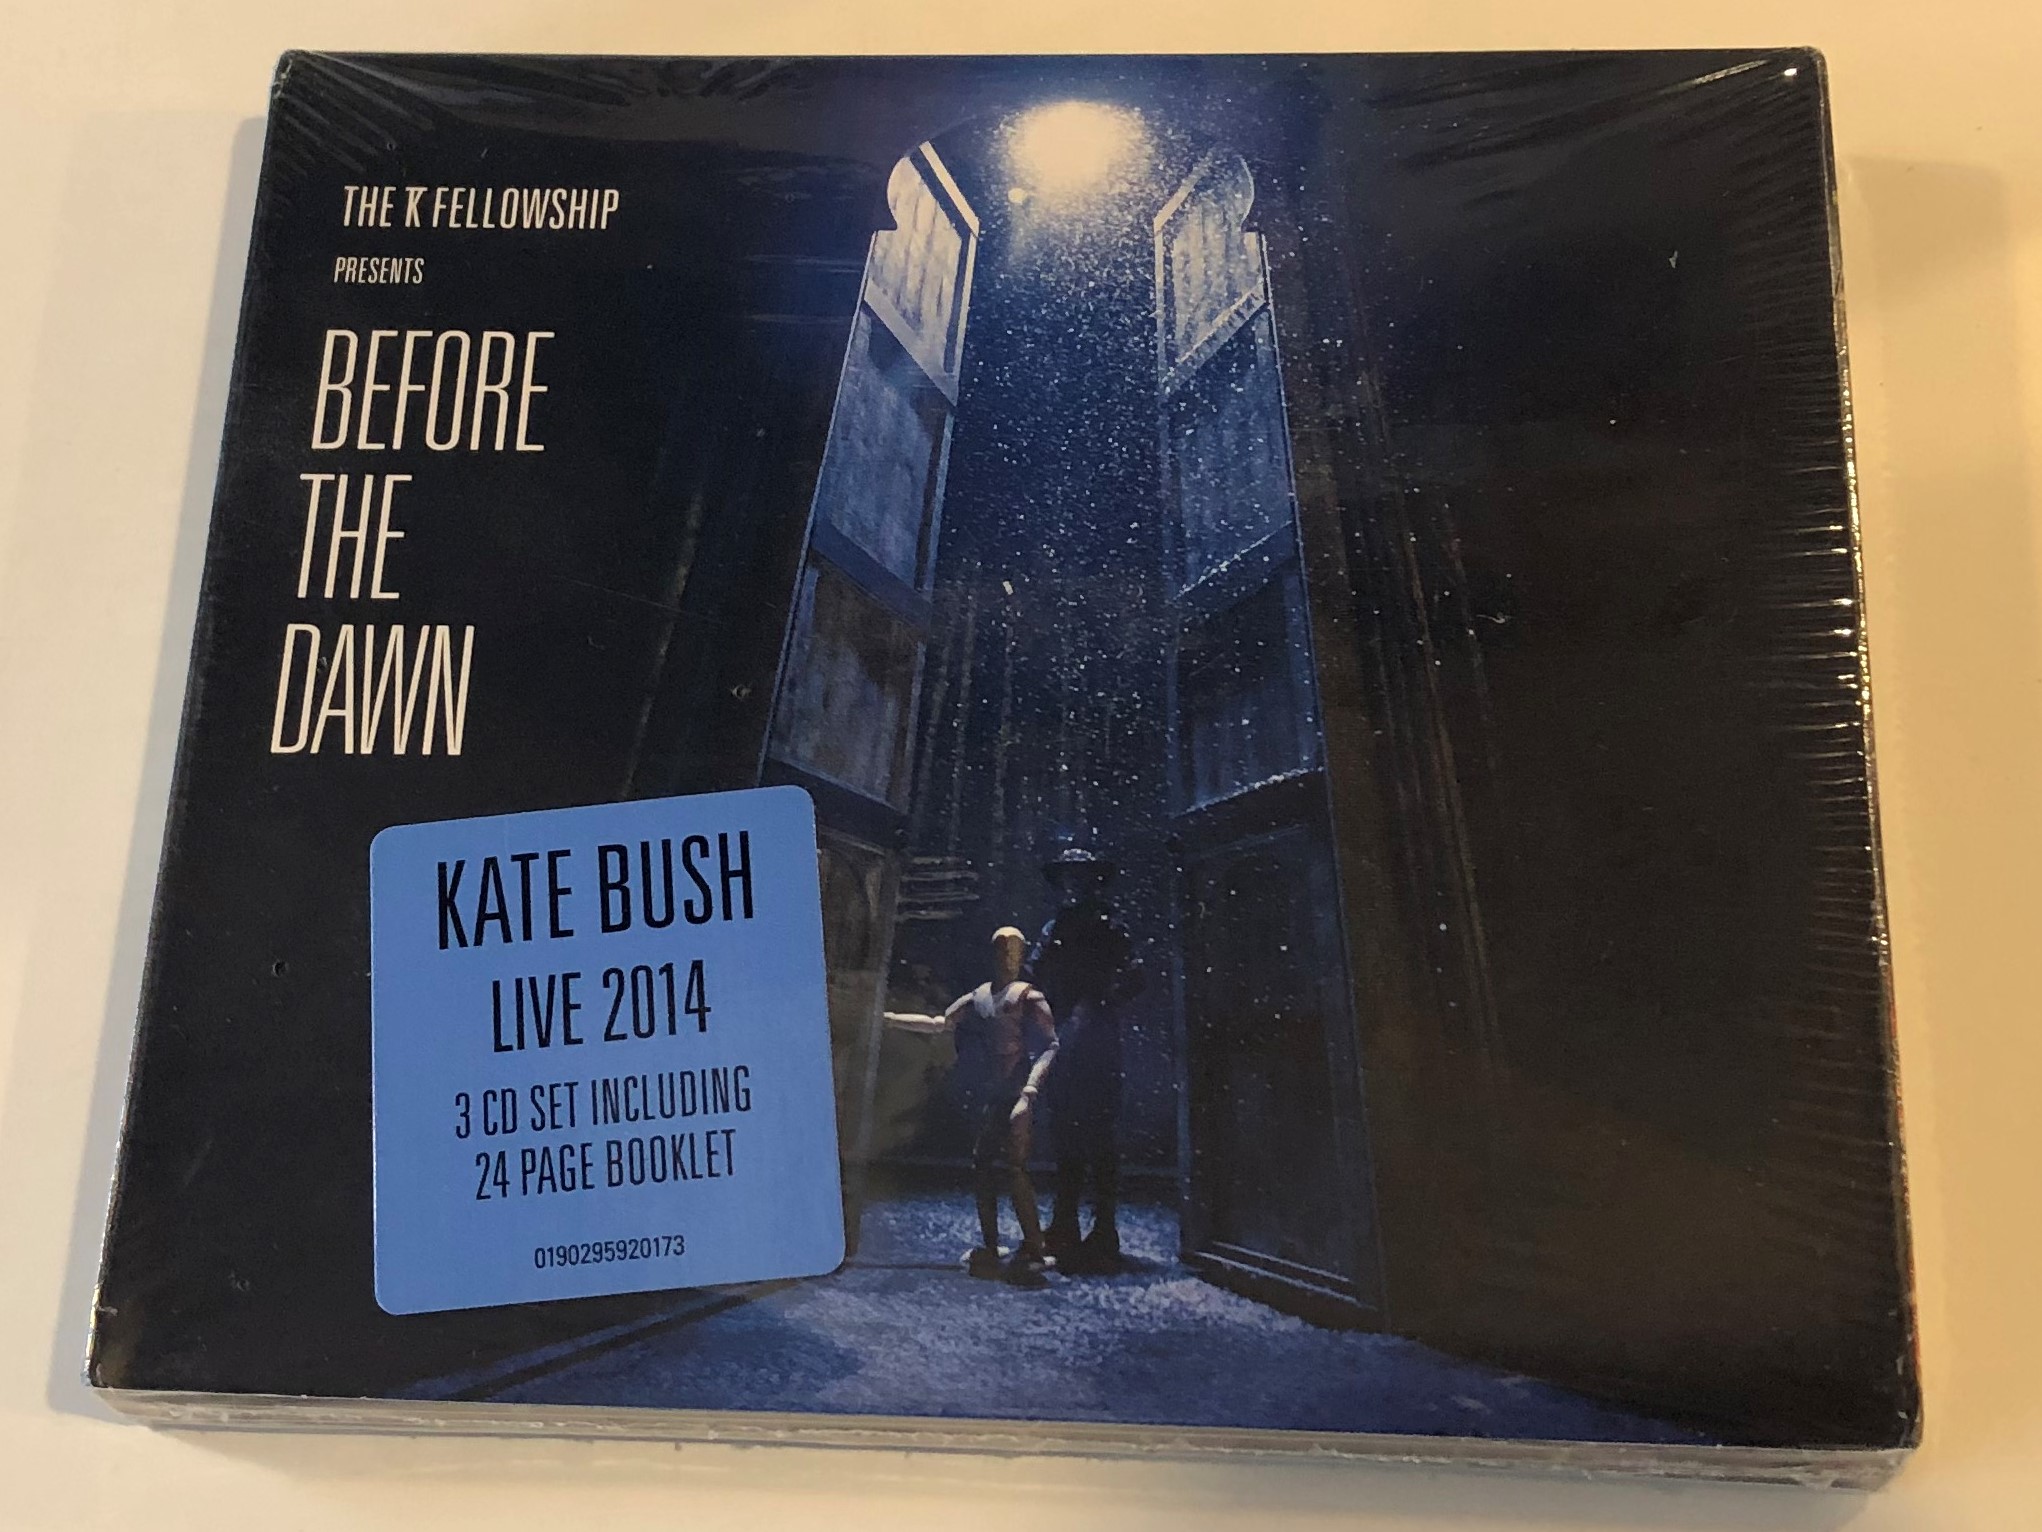 -the-kt-fellowship-presents-before-the-dawn-kate-bush-live-2014-3-cd-set-including-24-page-brooklet-fish-people-3x-audio-cd-2016-0190295920173-1-.jpg